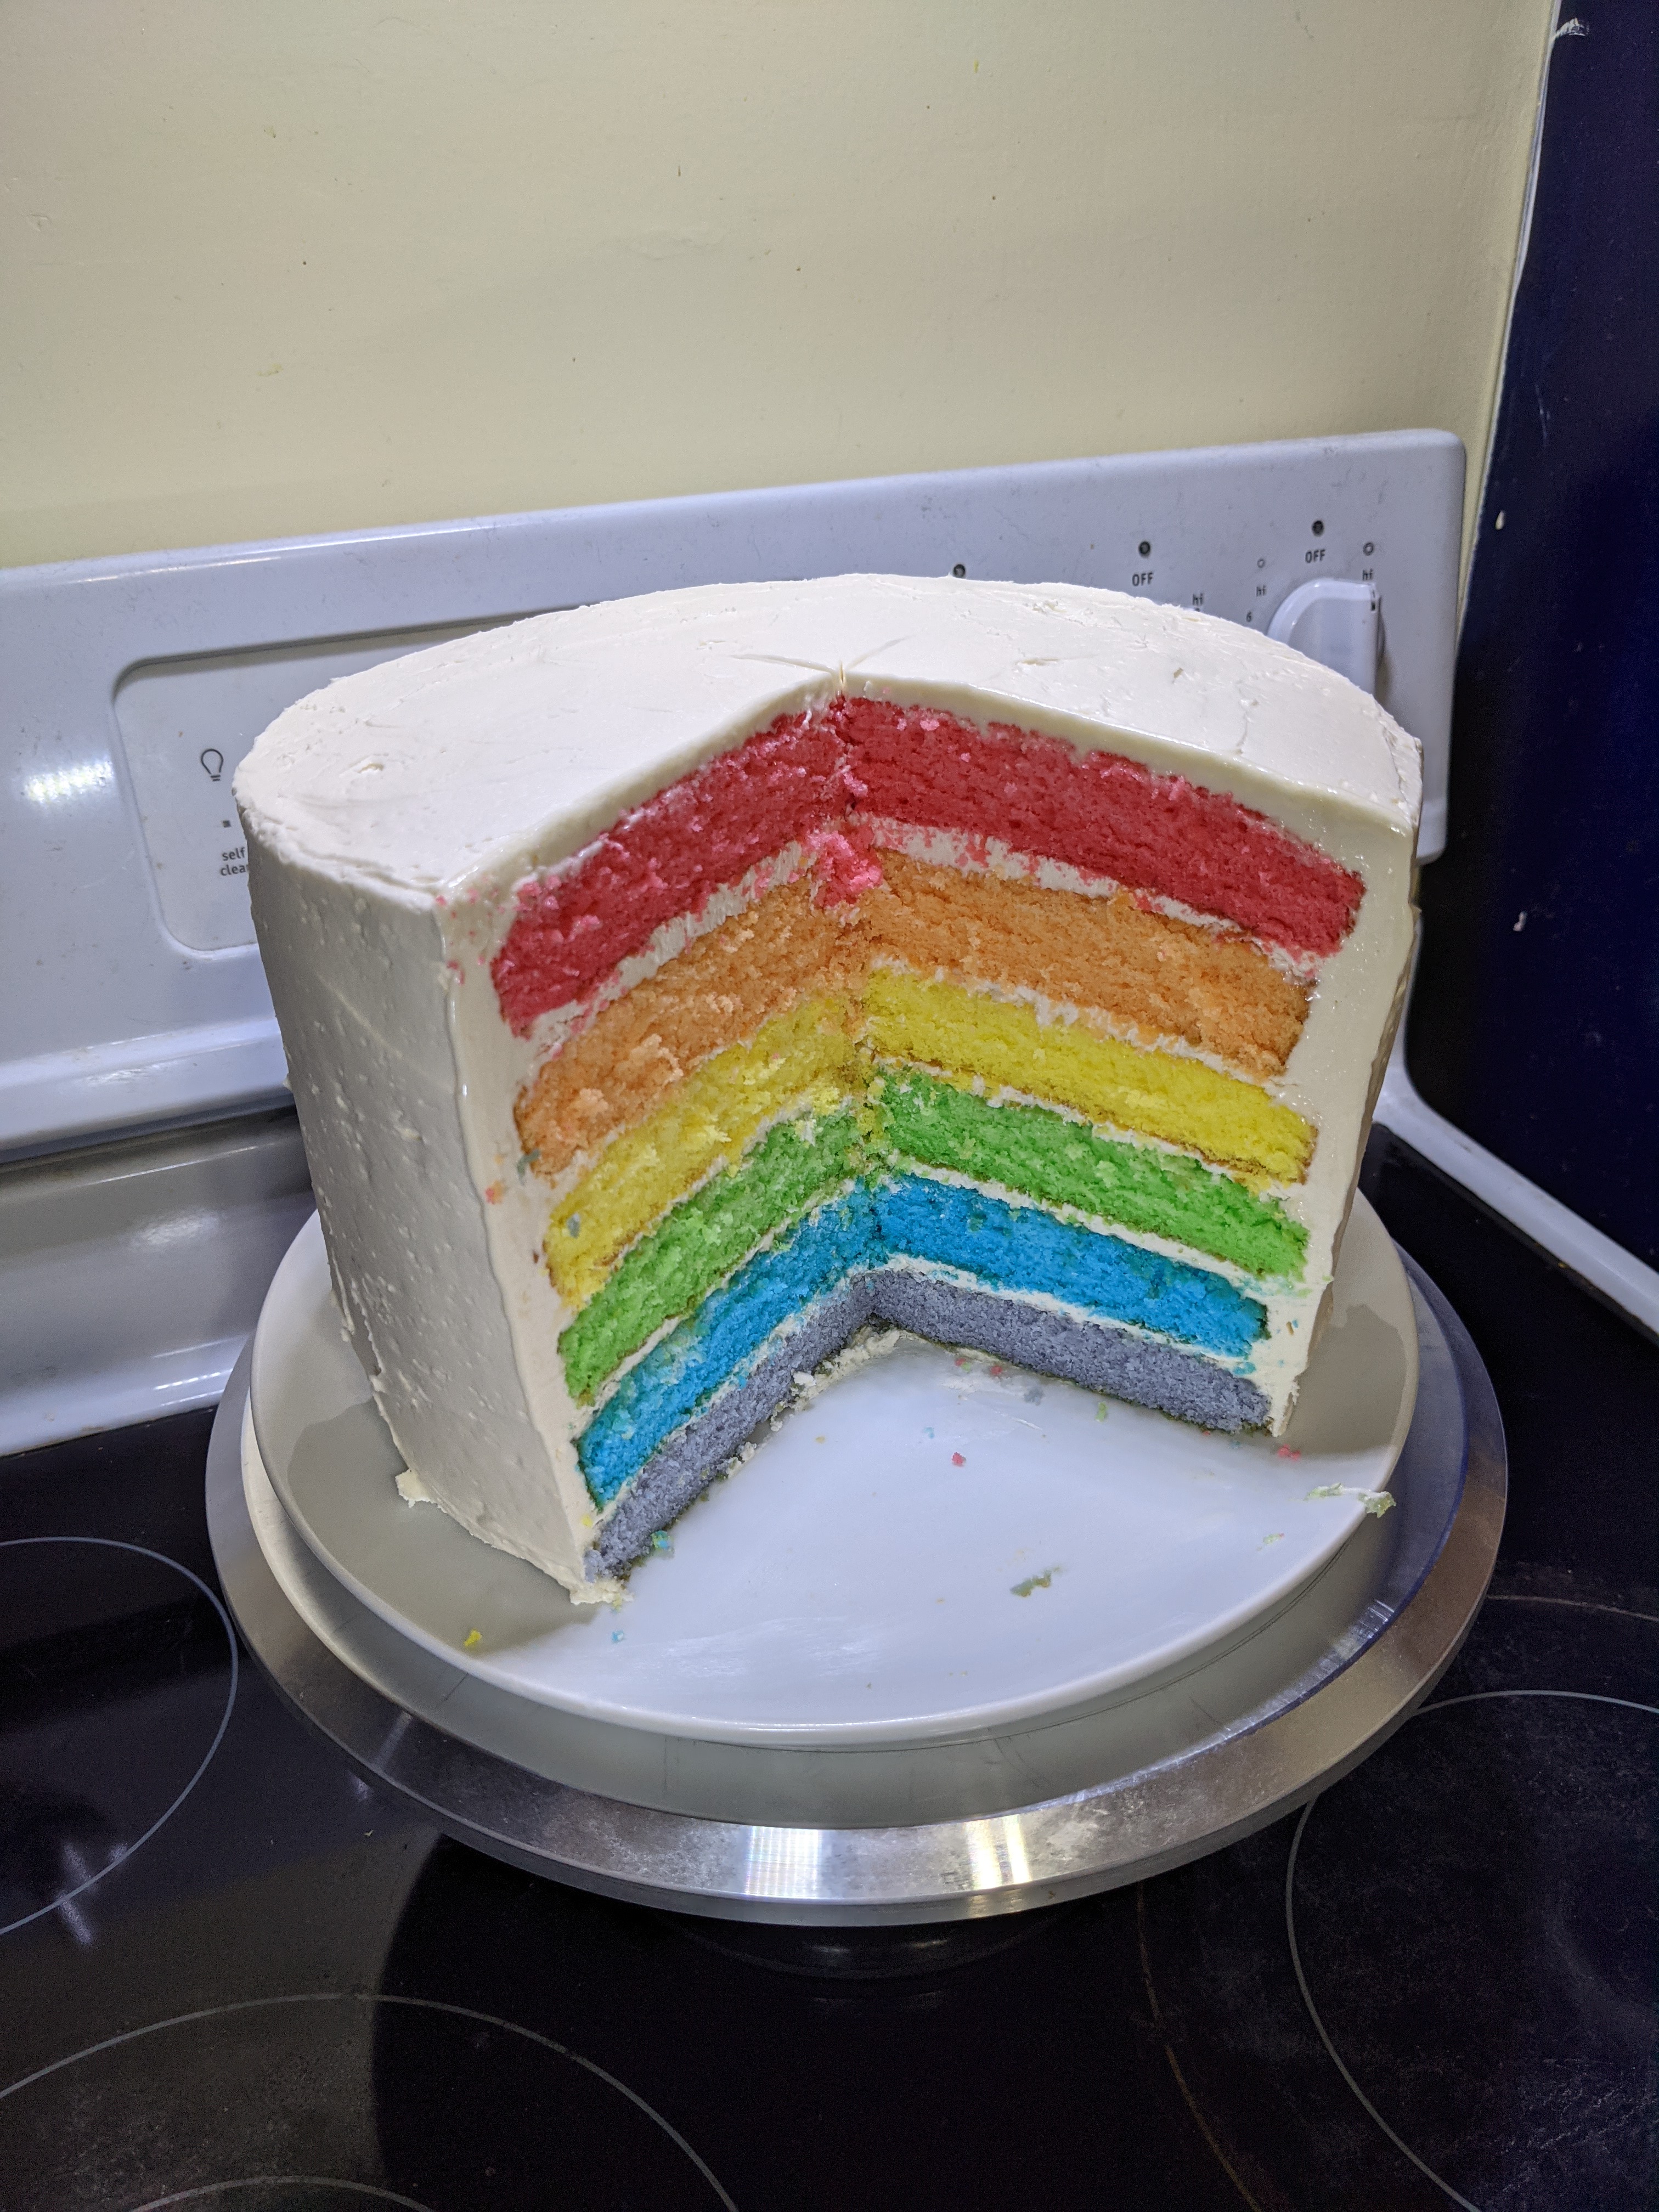 The cross section of a 6 layer rainbow cake